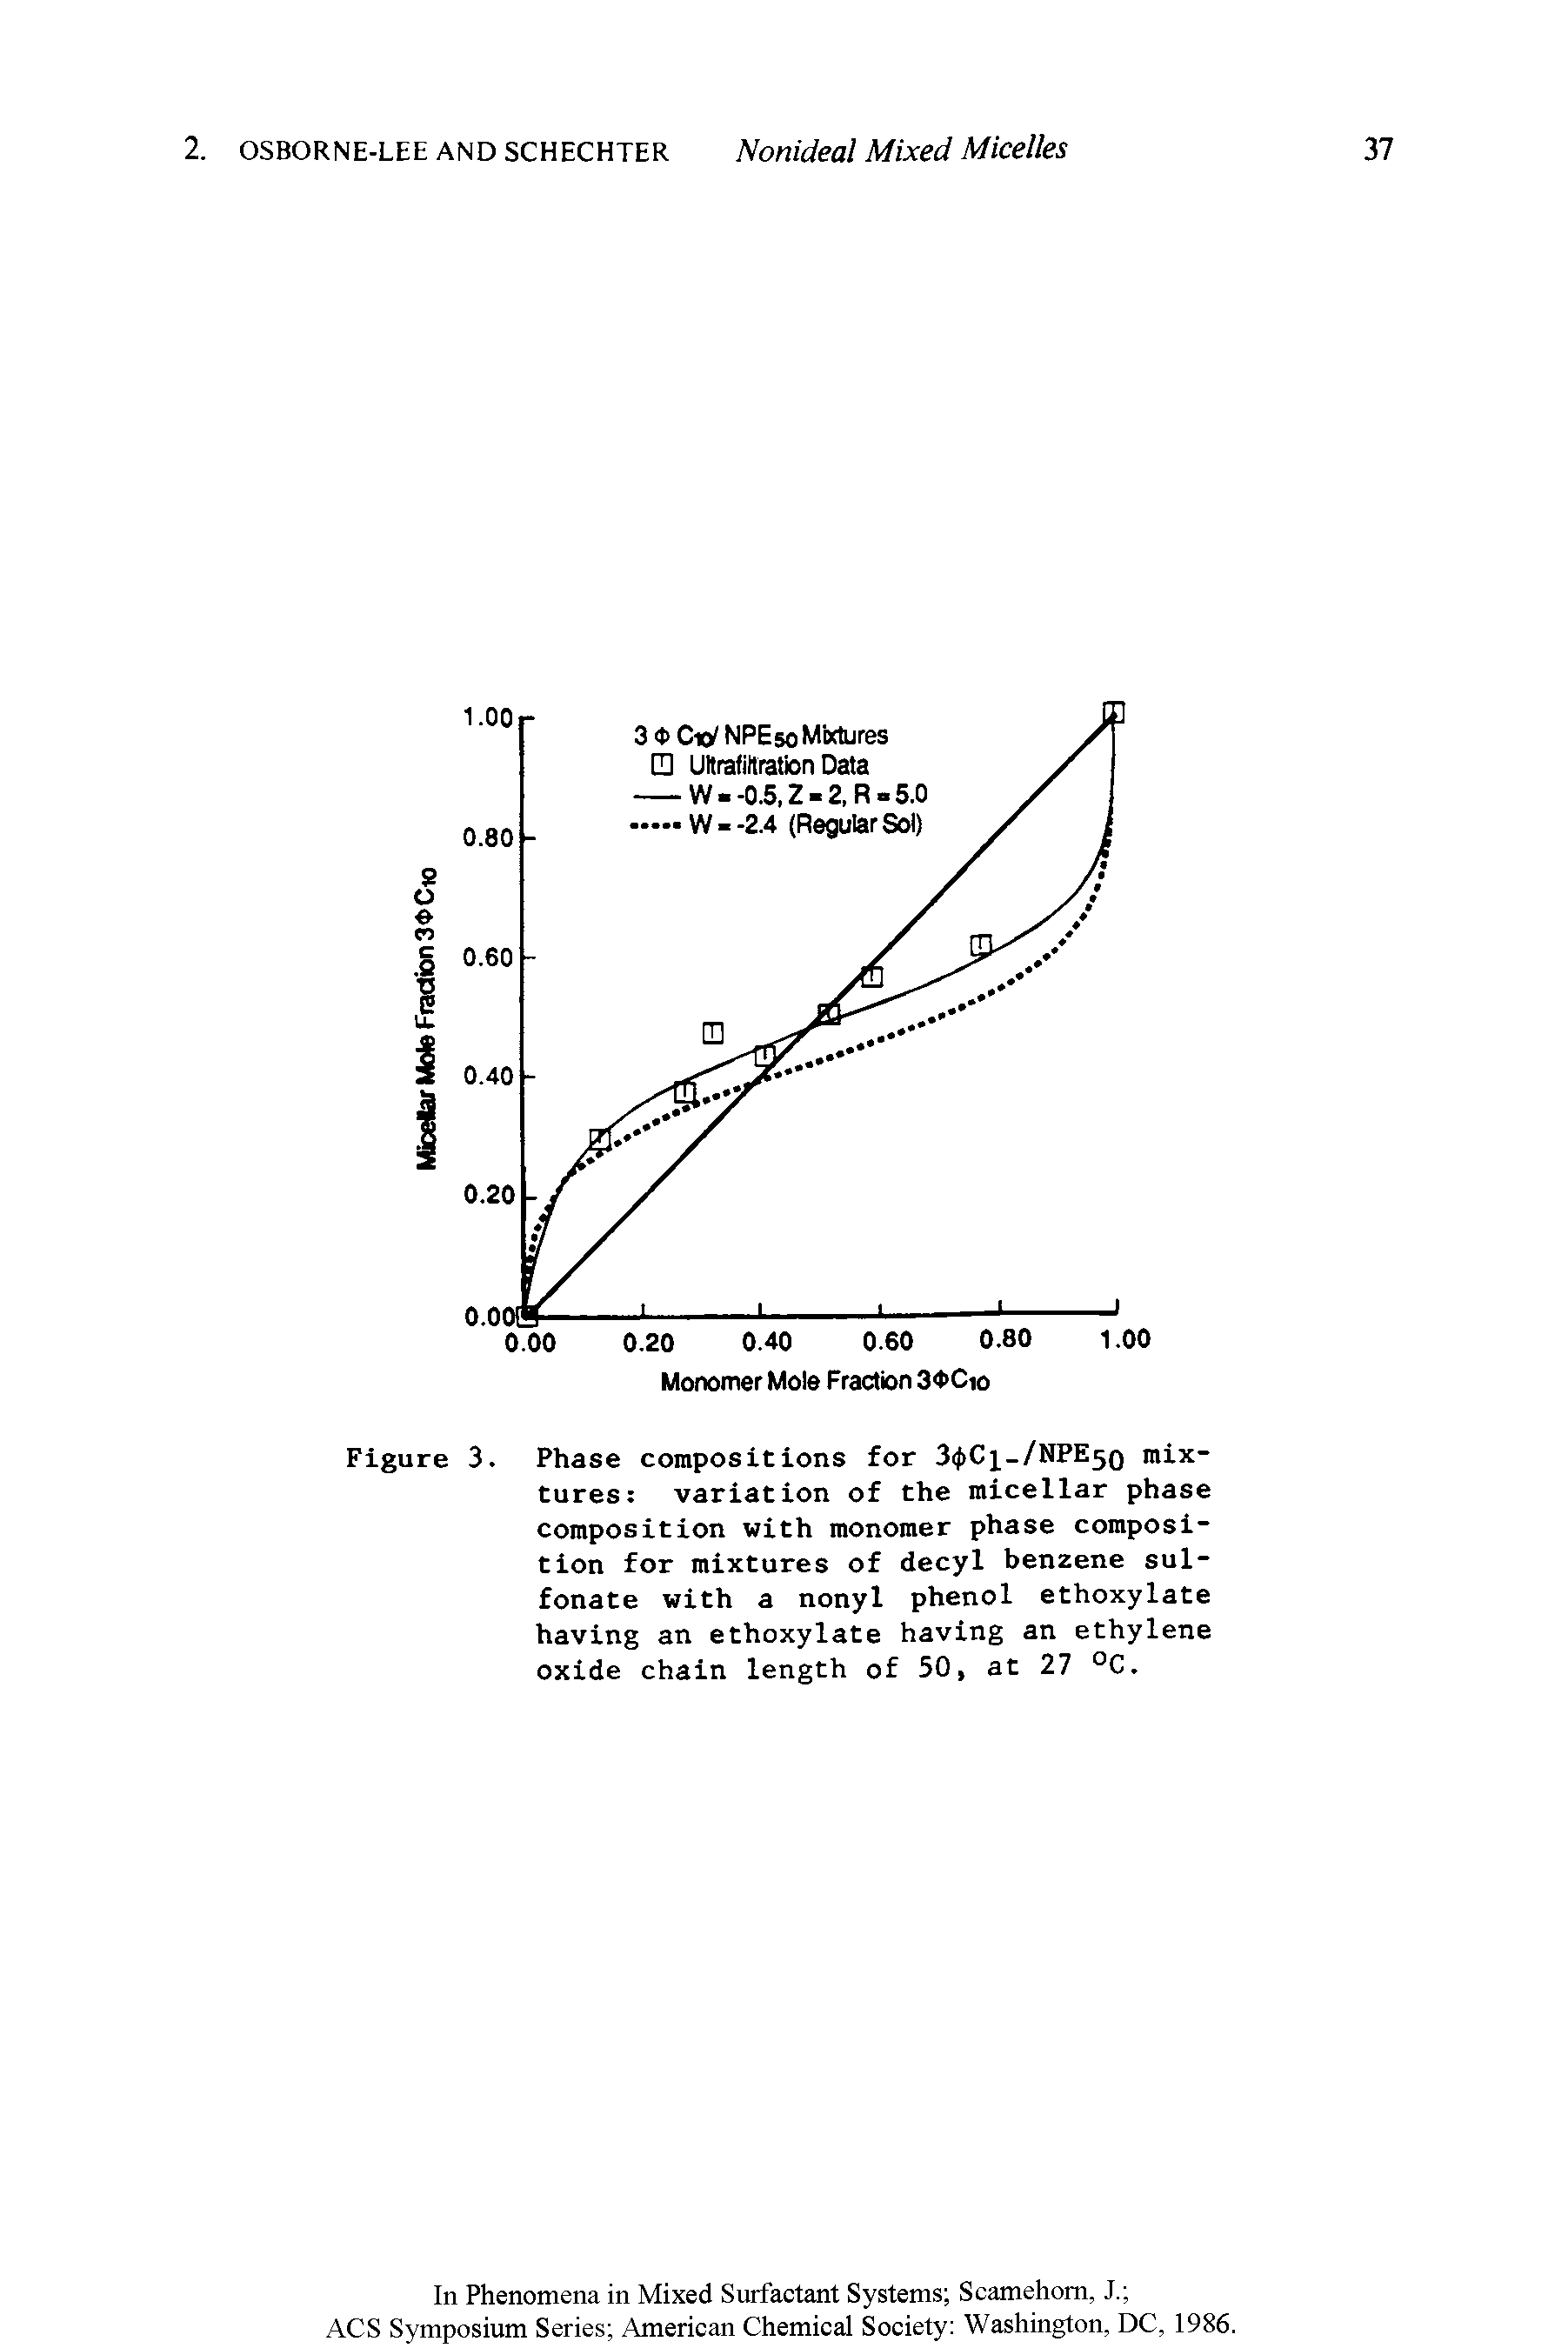 Figure 3. Phase compositions for 3((>Ci-/NPE5o mixtures variation of the micellar phase composition with monomer phase composition for mixtures of decyl benzene sulfonate with a nonyl phenol ethoxylate having an ethoxylate having an ethylene oxide chain length of 50, at 27 °C.